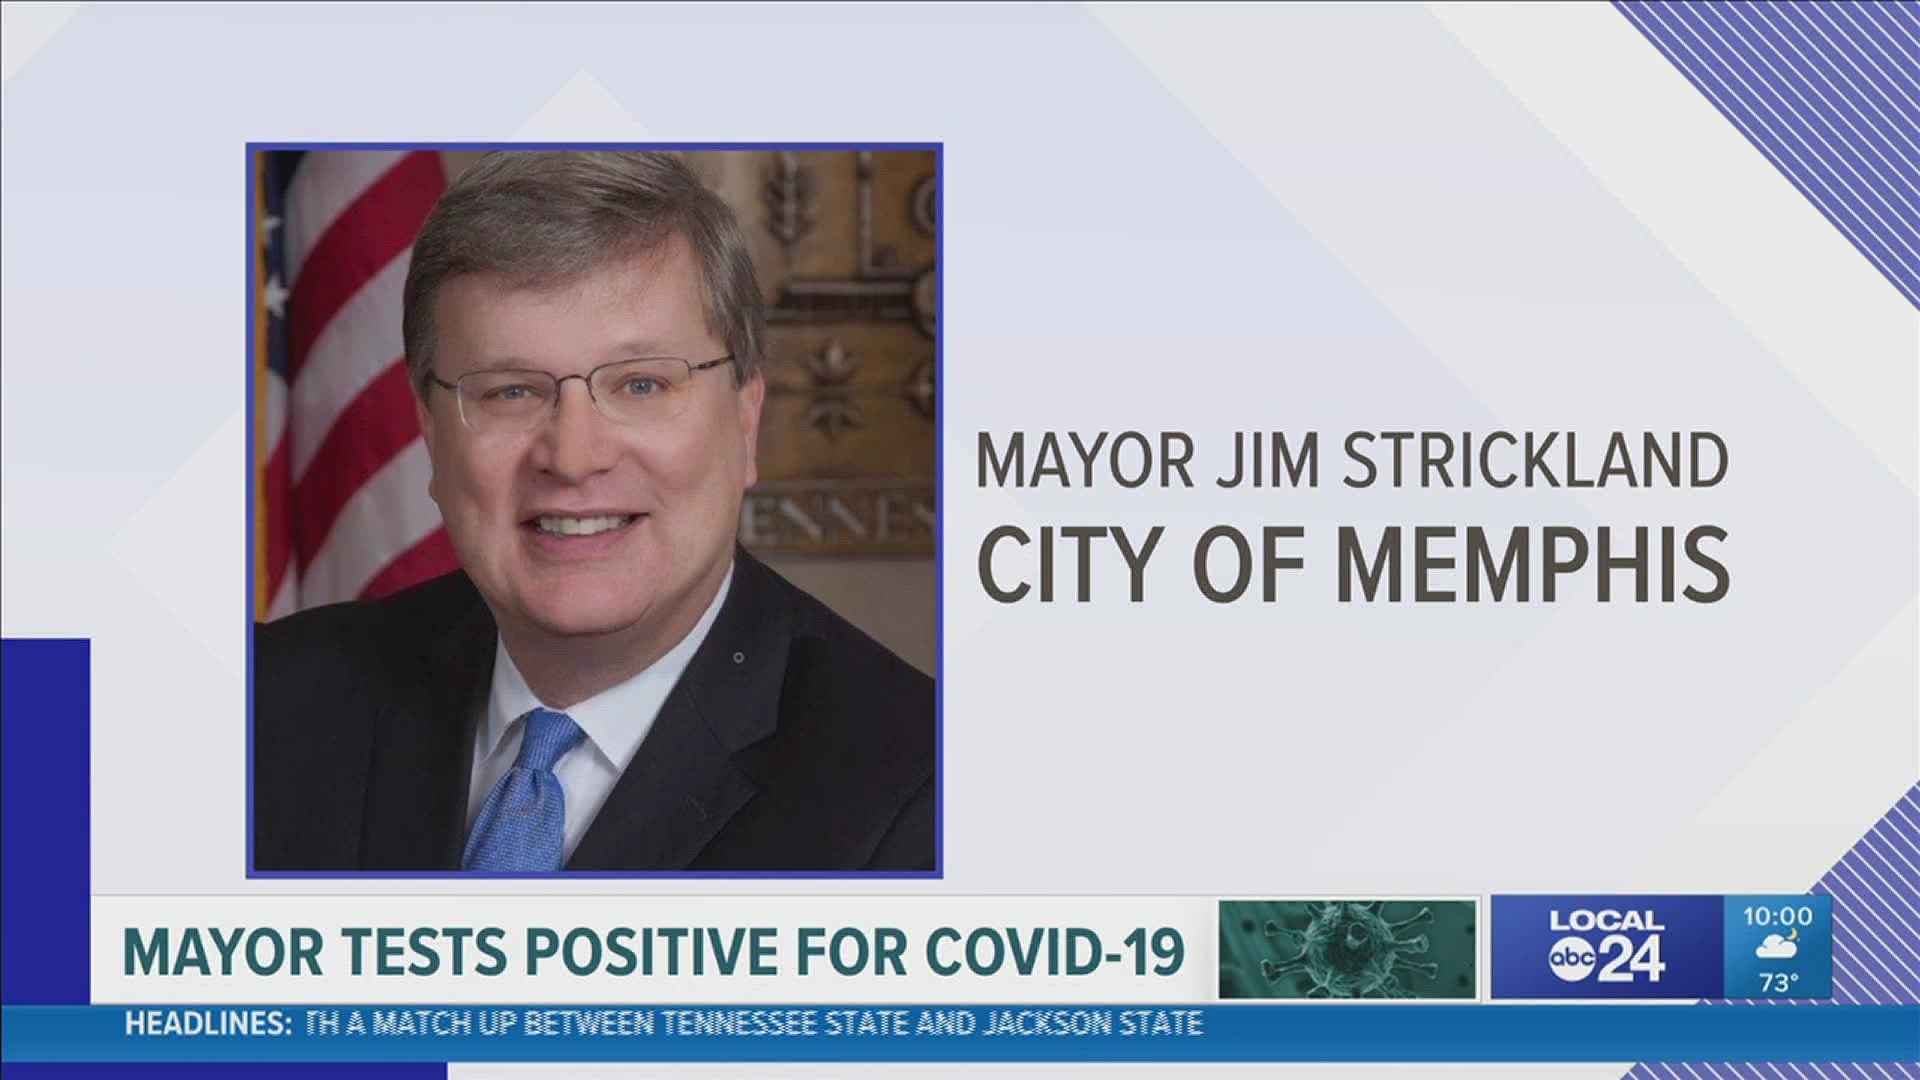 Friday evening, Memphis Mayor Strickland tweeted that he tested positive for the virus.